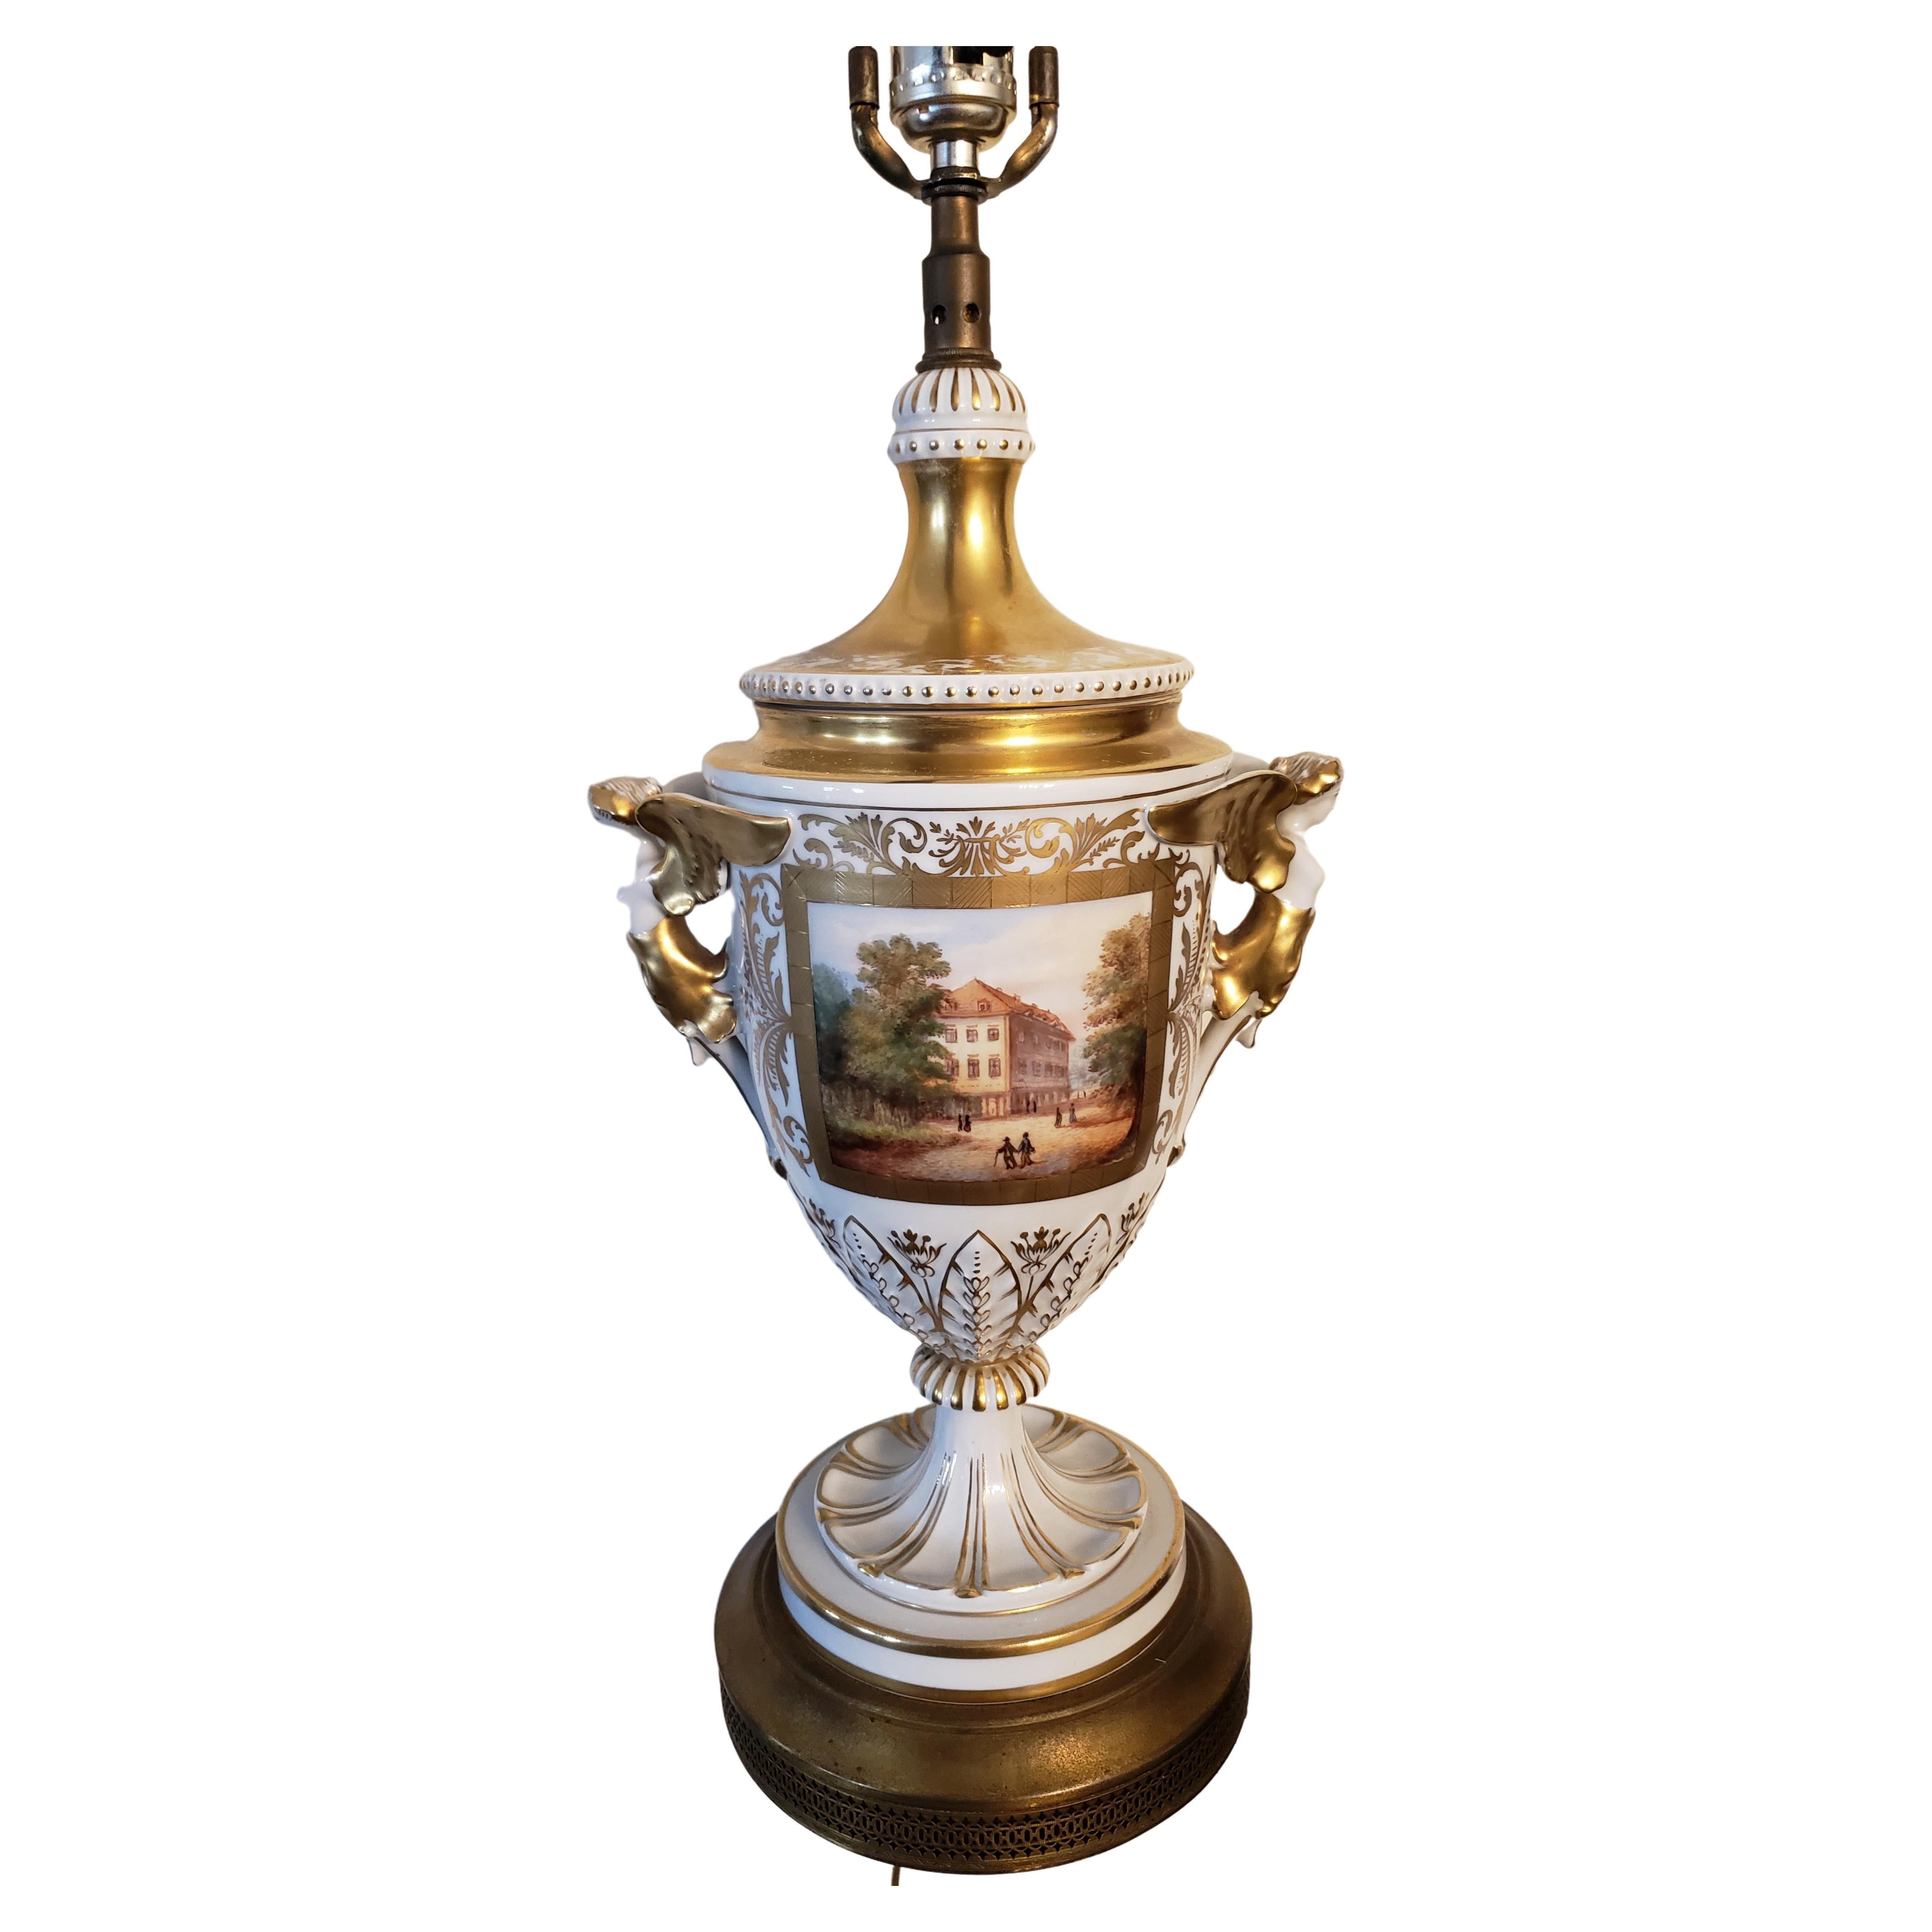 Antique English Porcelain Hand Painted 24K Gold Plated Trophy Lamp, Circa 1920s For Sale 5